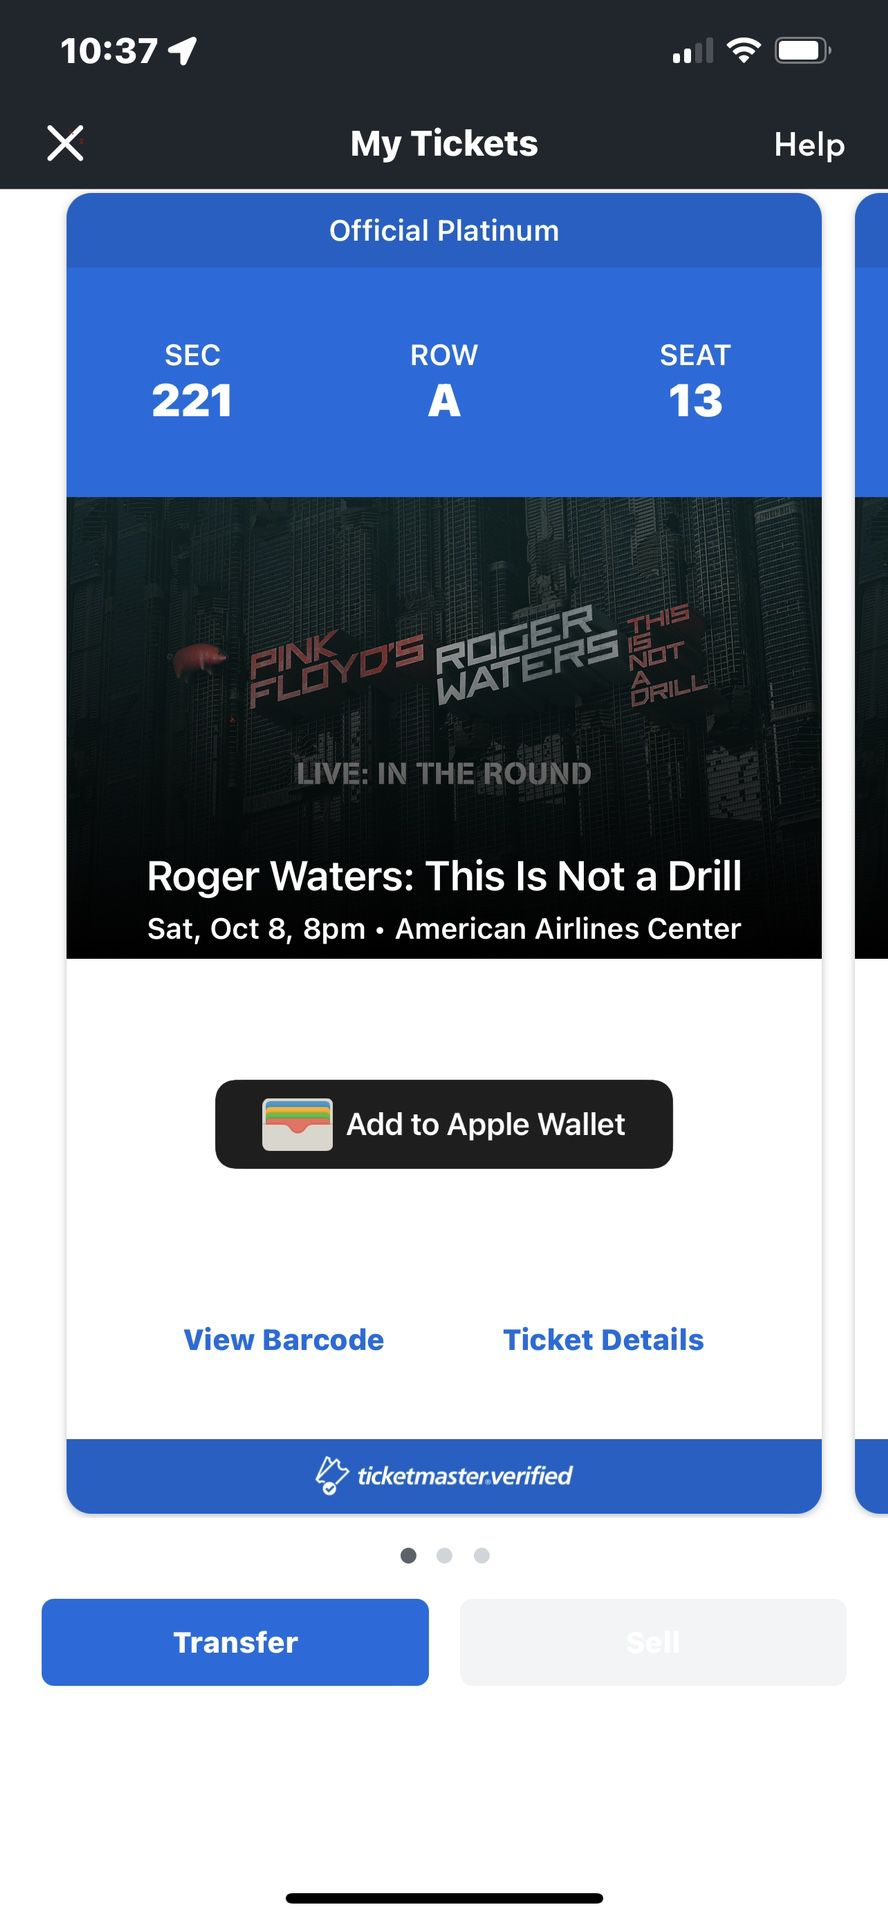 Roger Waters: This Is Not A Drill Passes Oct 8th